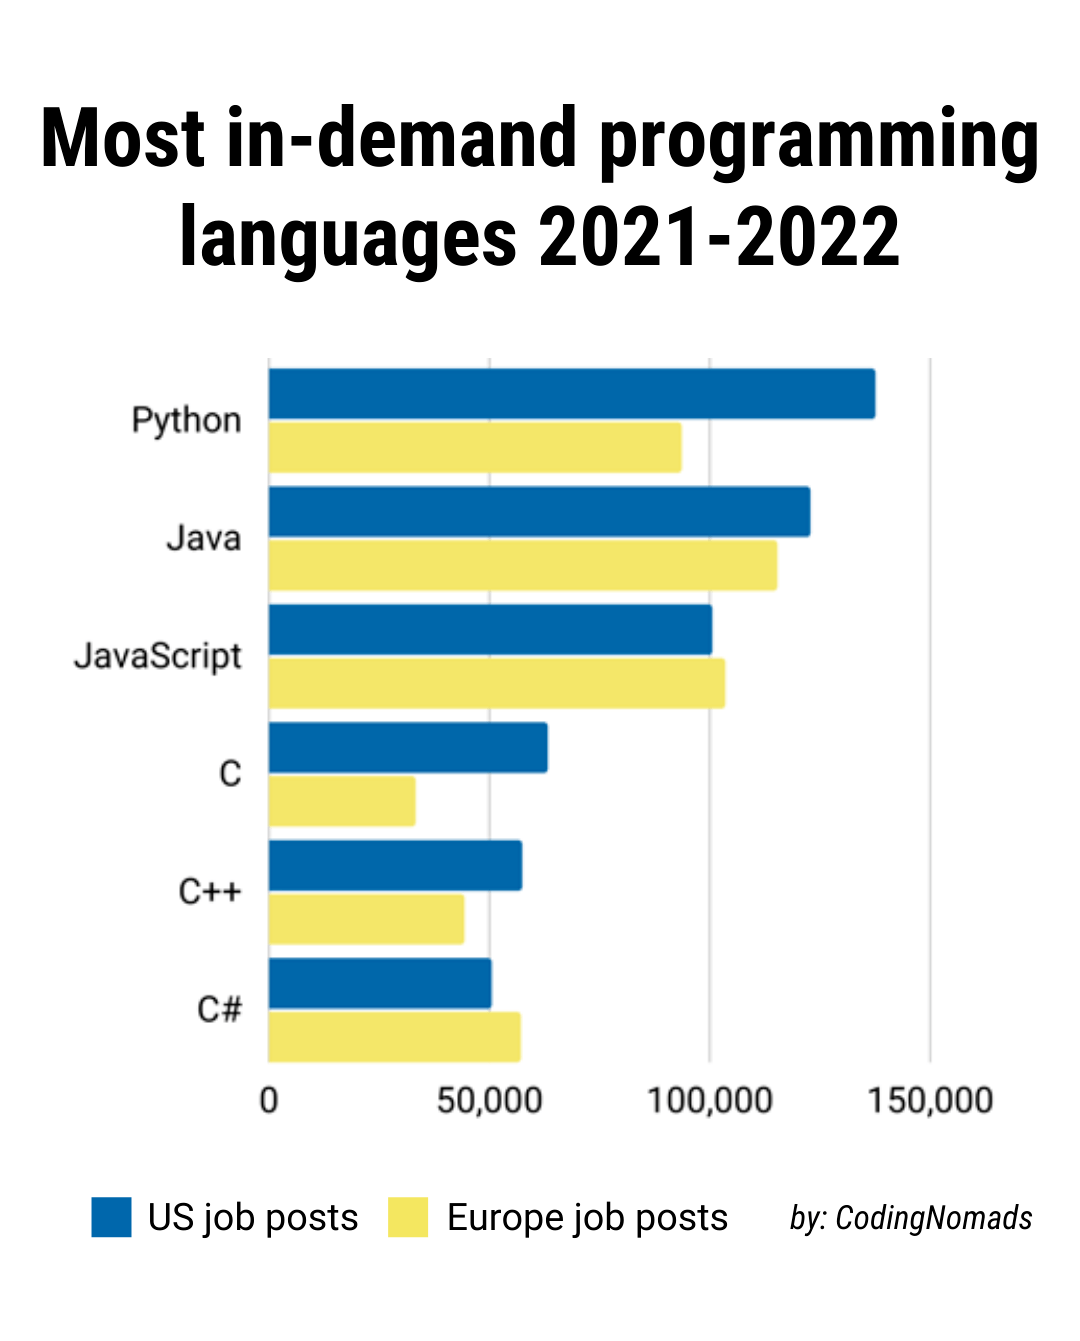 Is Excel the most popular programming language?